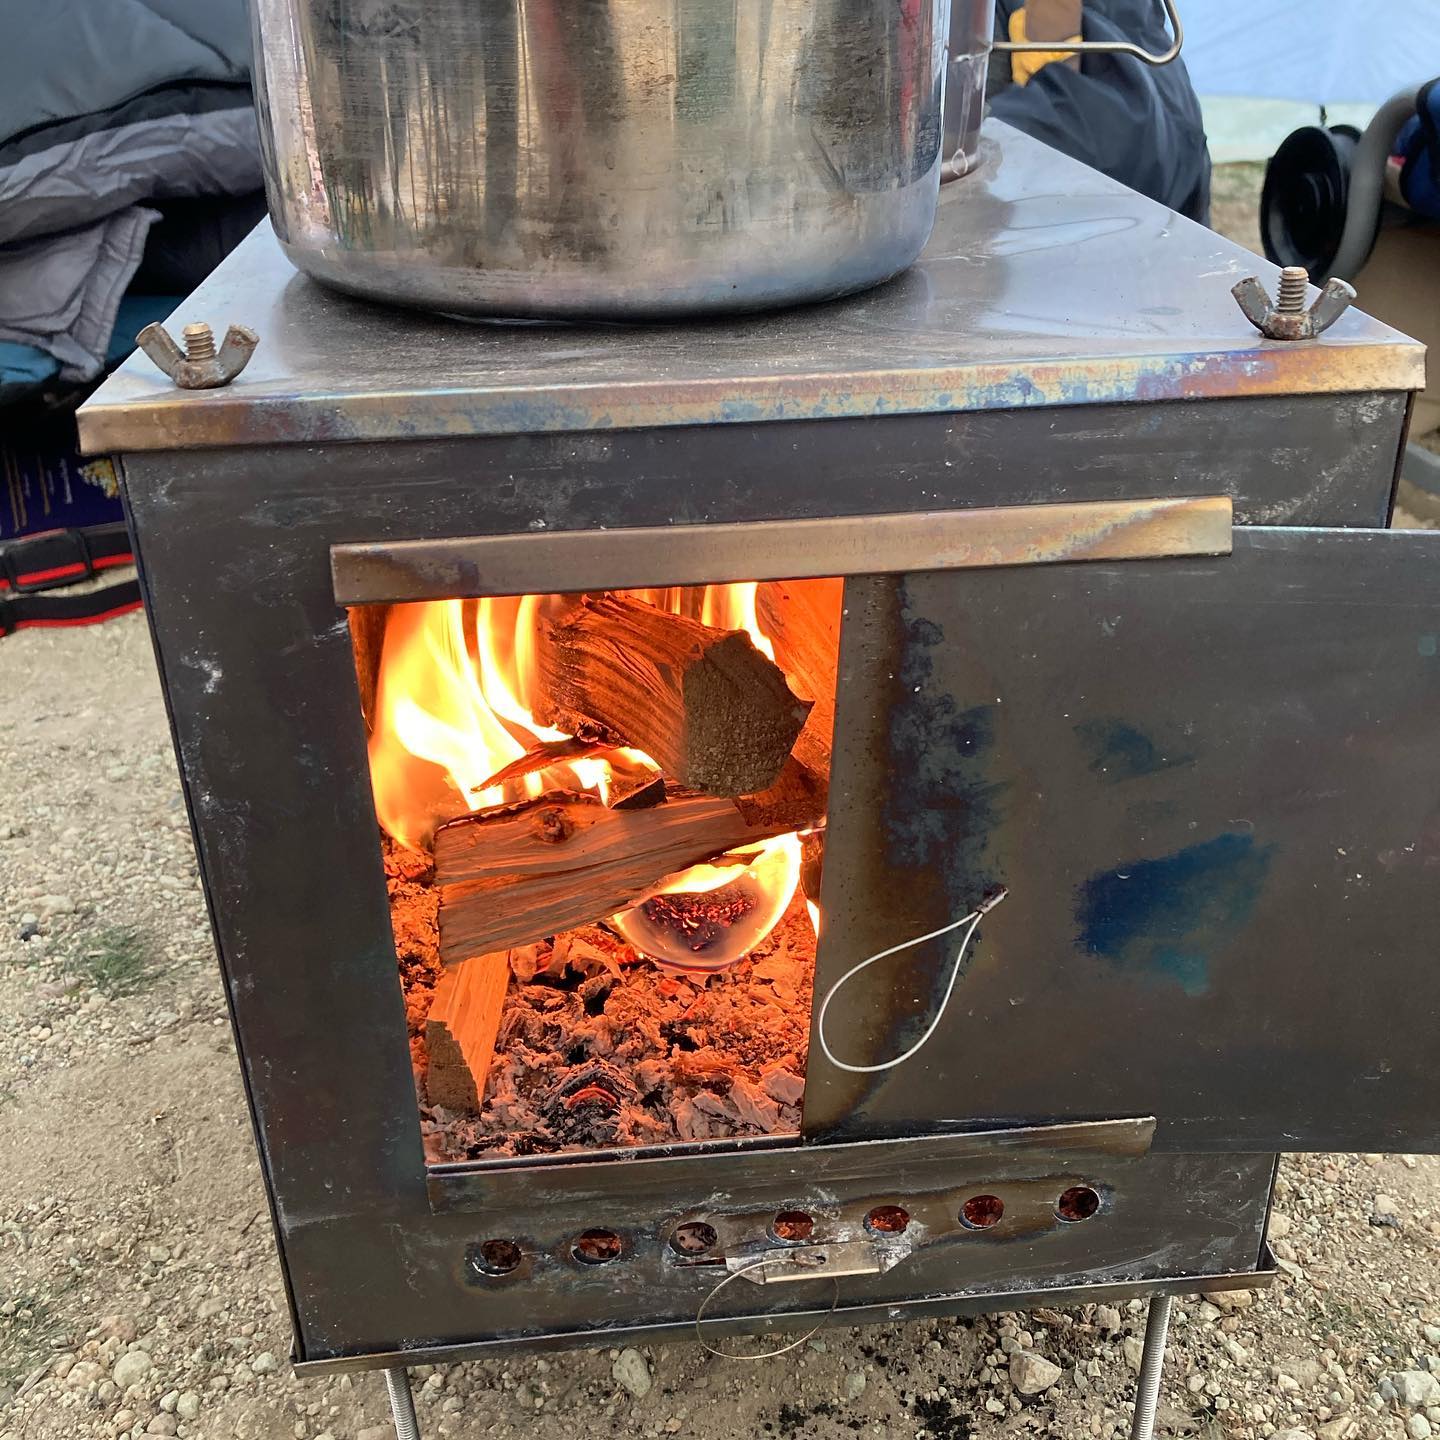 Portable camping stove with wood burning inside it - Hello Trail